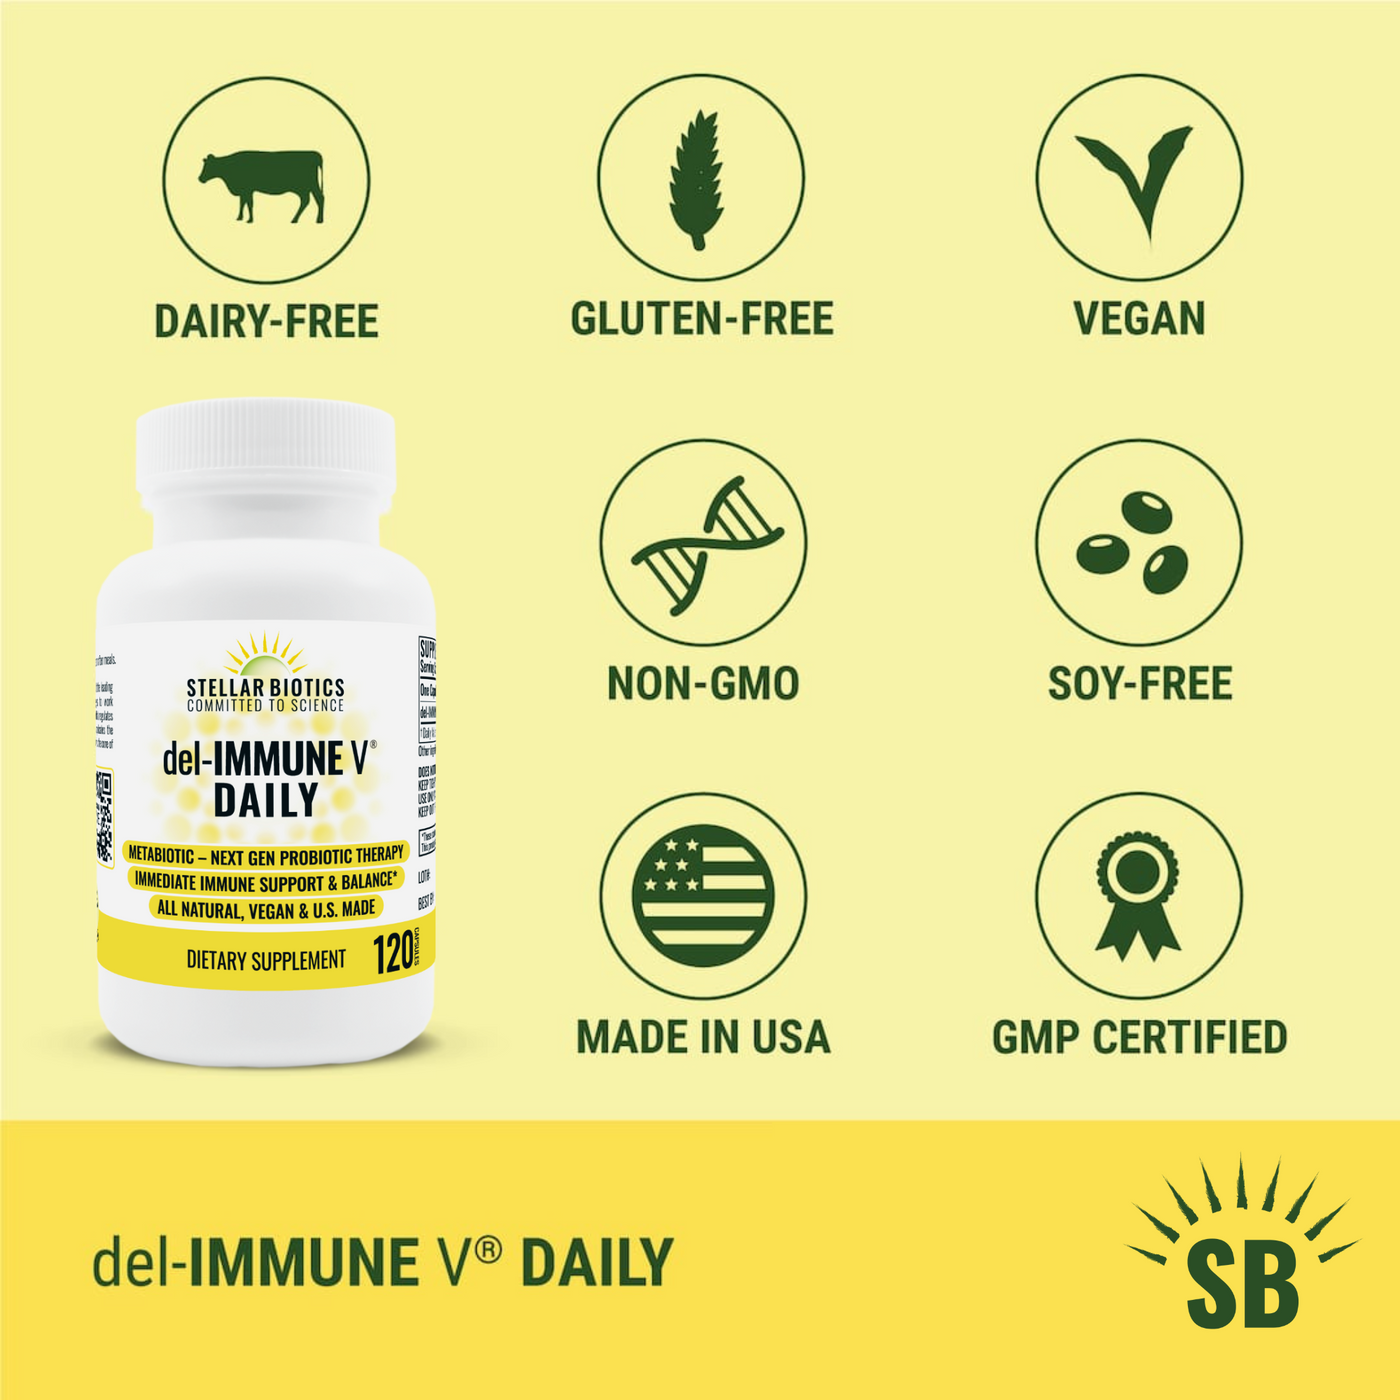 del-IMMUNE V® DAILY is All-Natural, Non-GMO, Dairy-Free, Gluten-Free, Soy-Free, GMP Certified, Made in USA